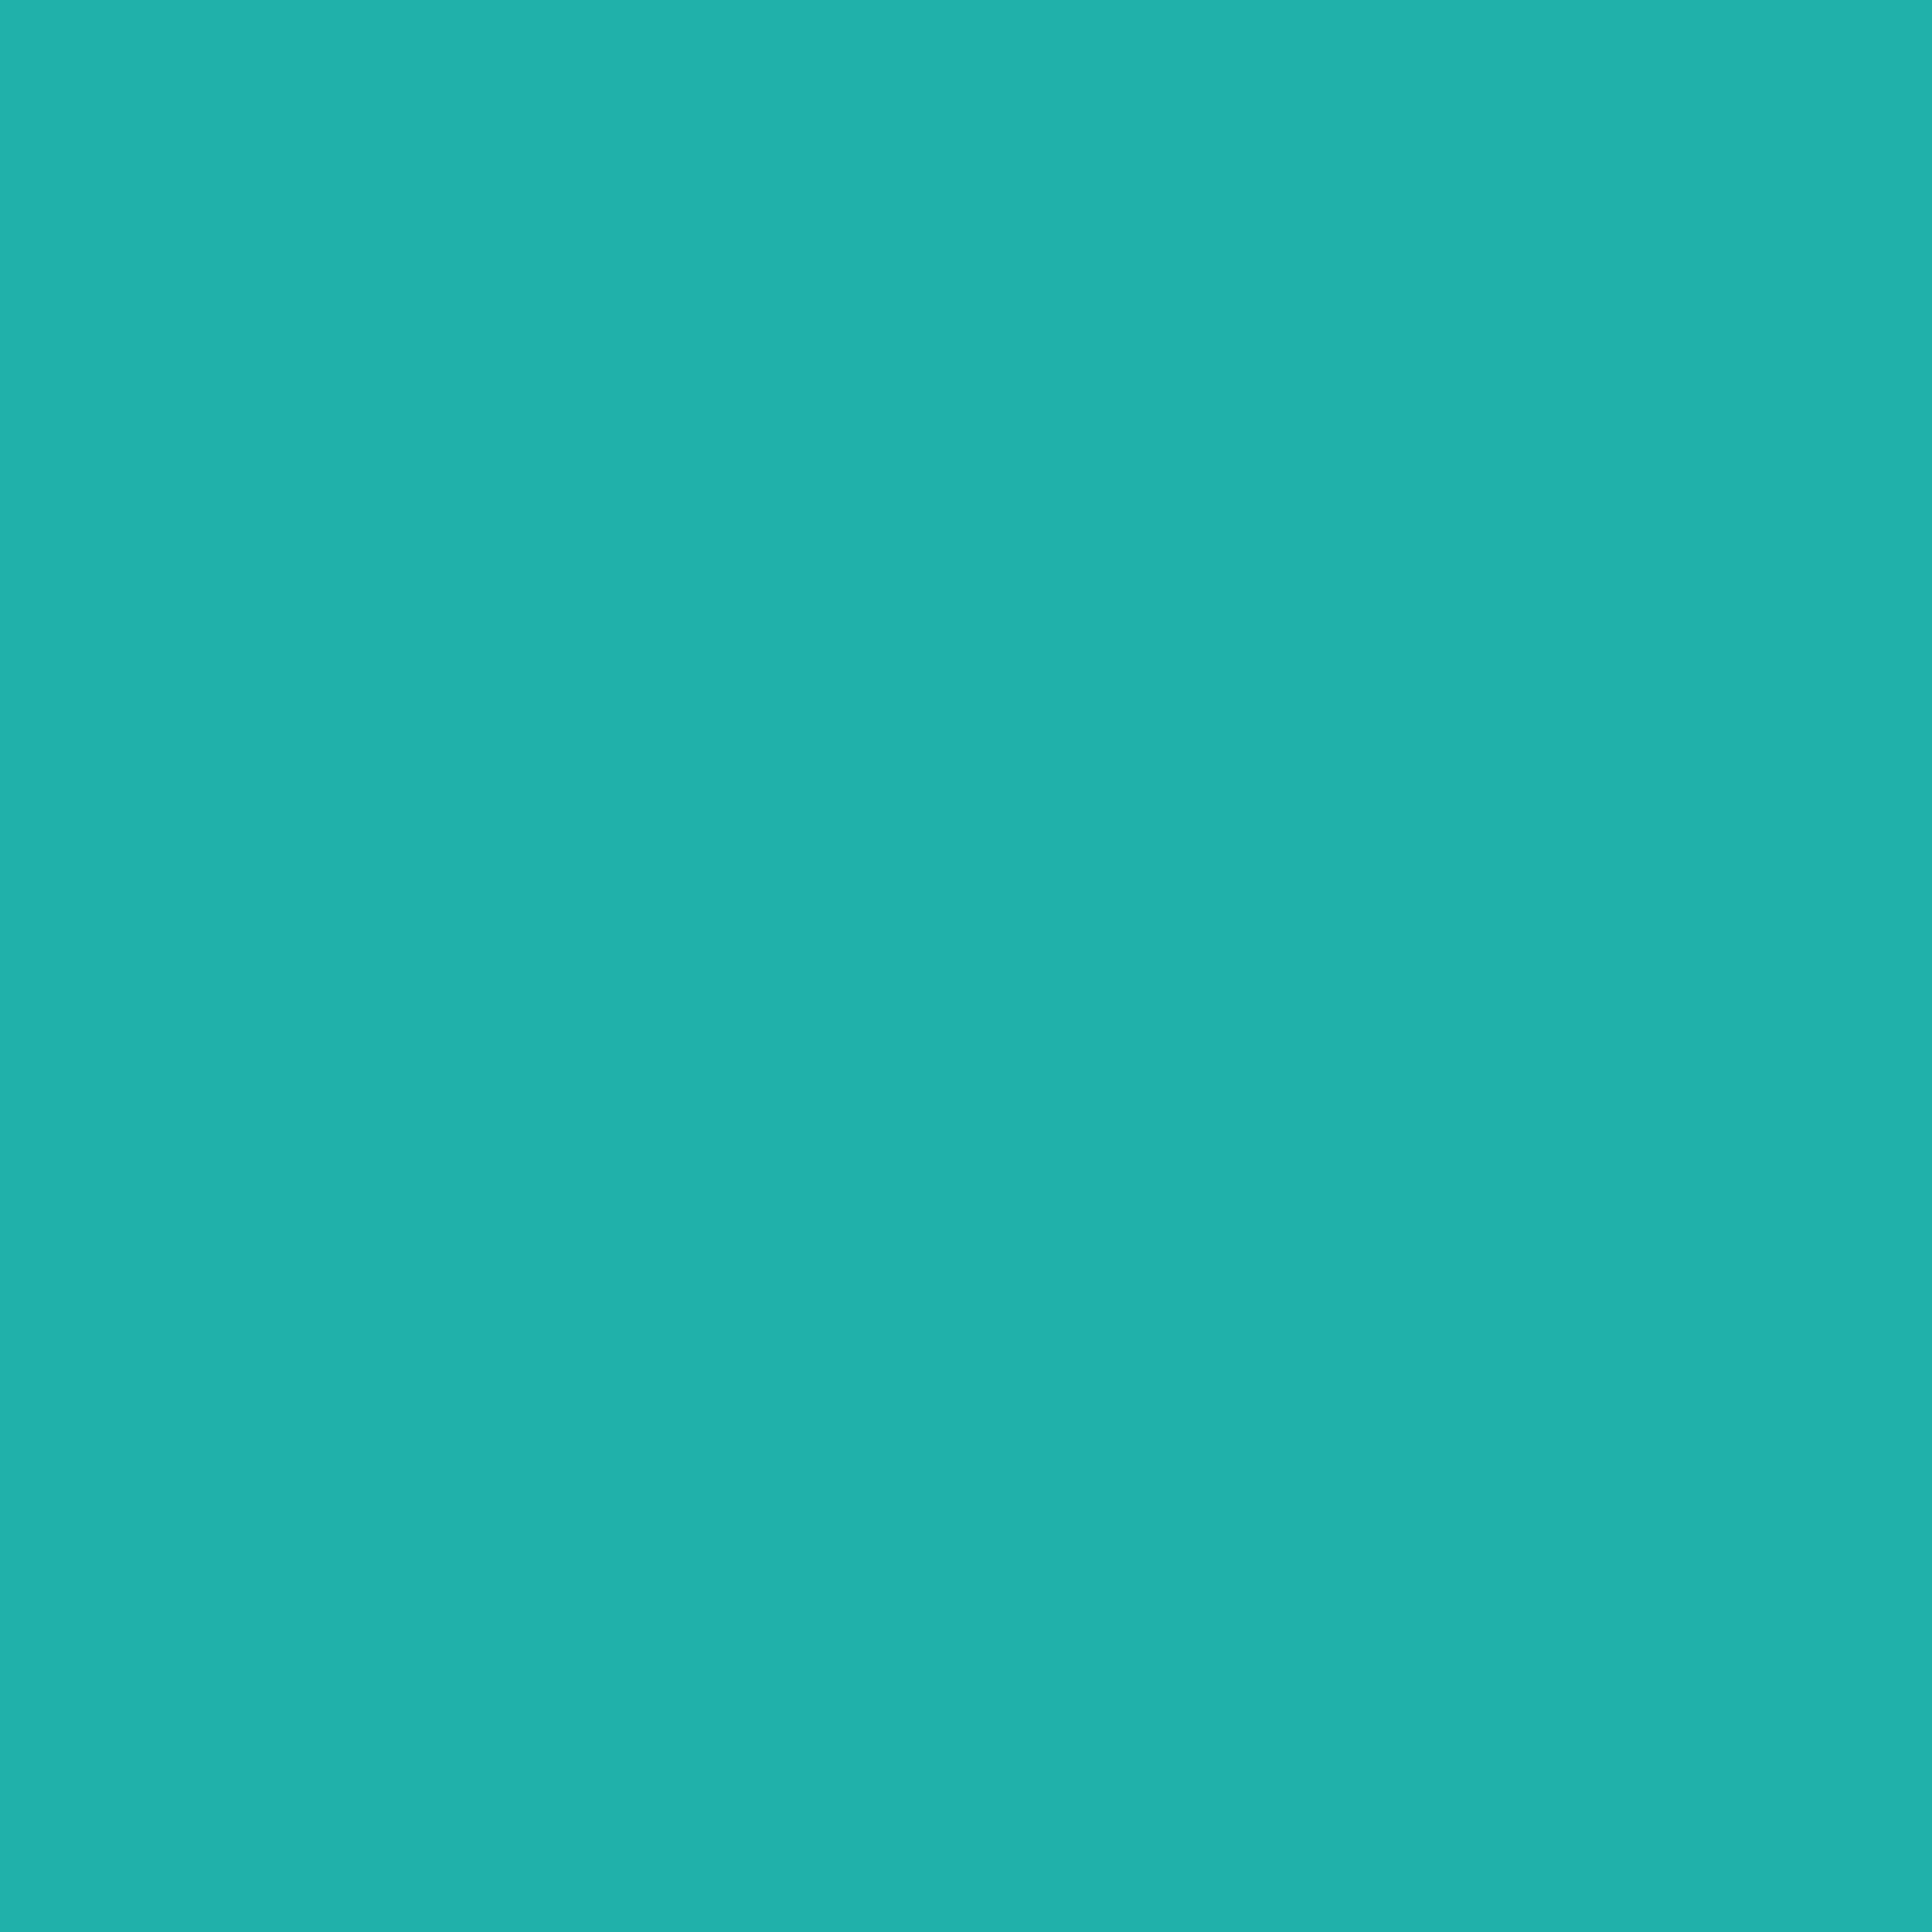 2732x2732 Light Sea Green Solid Color Background